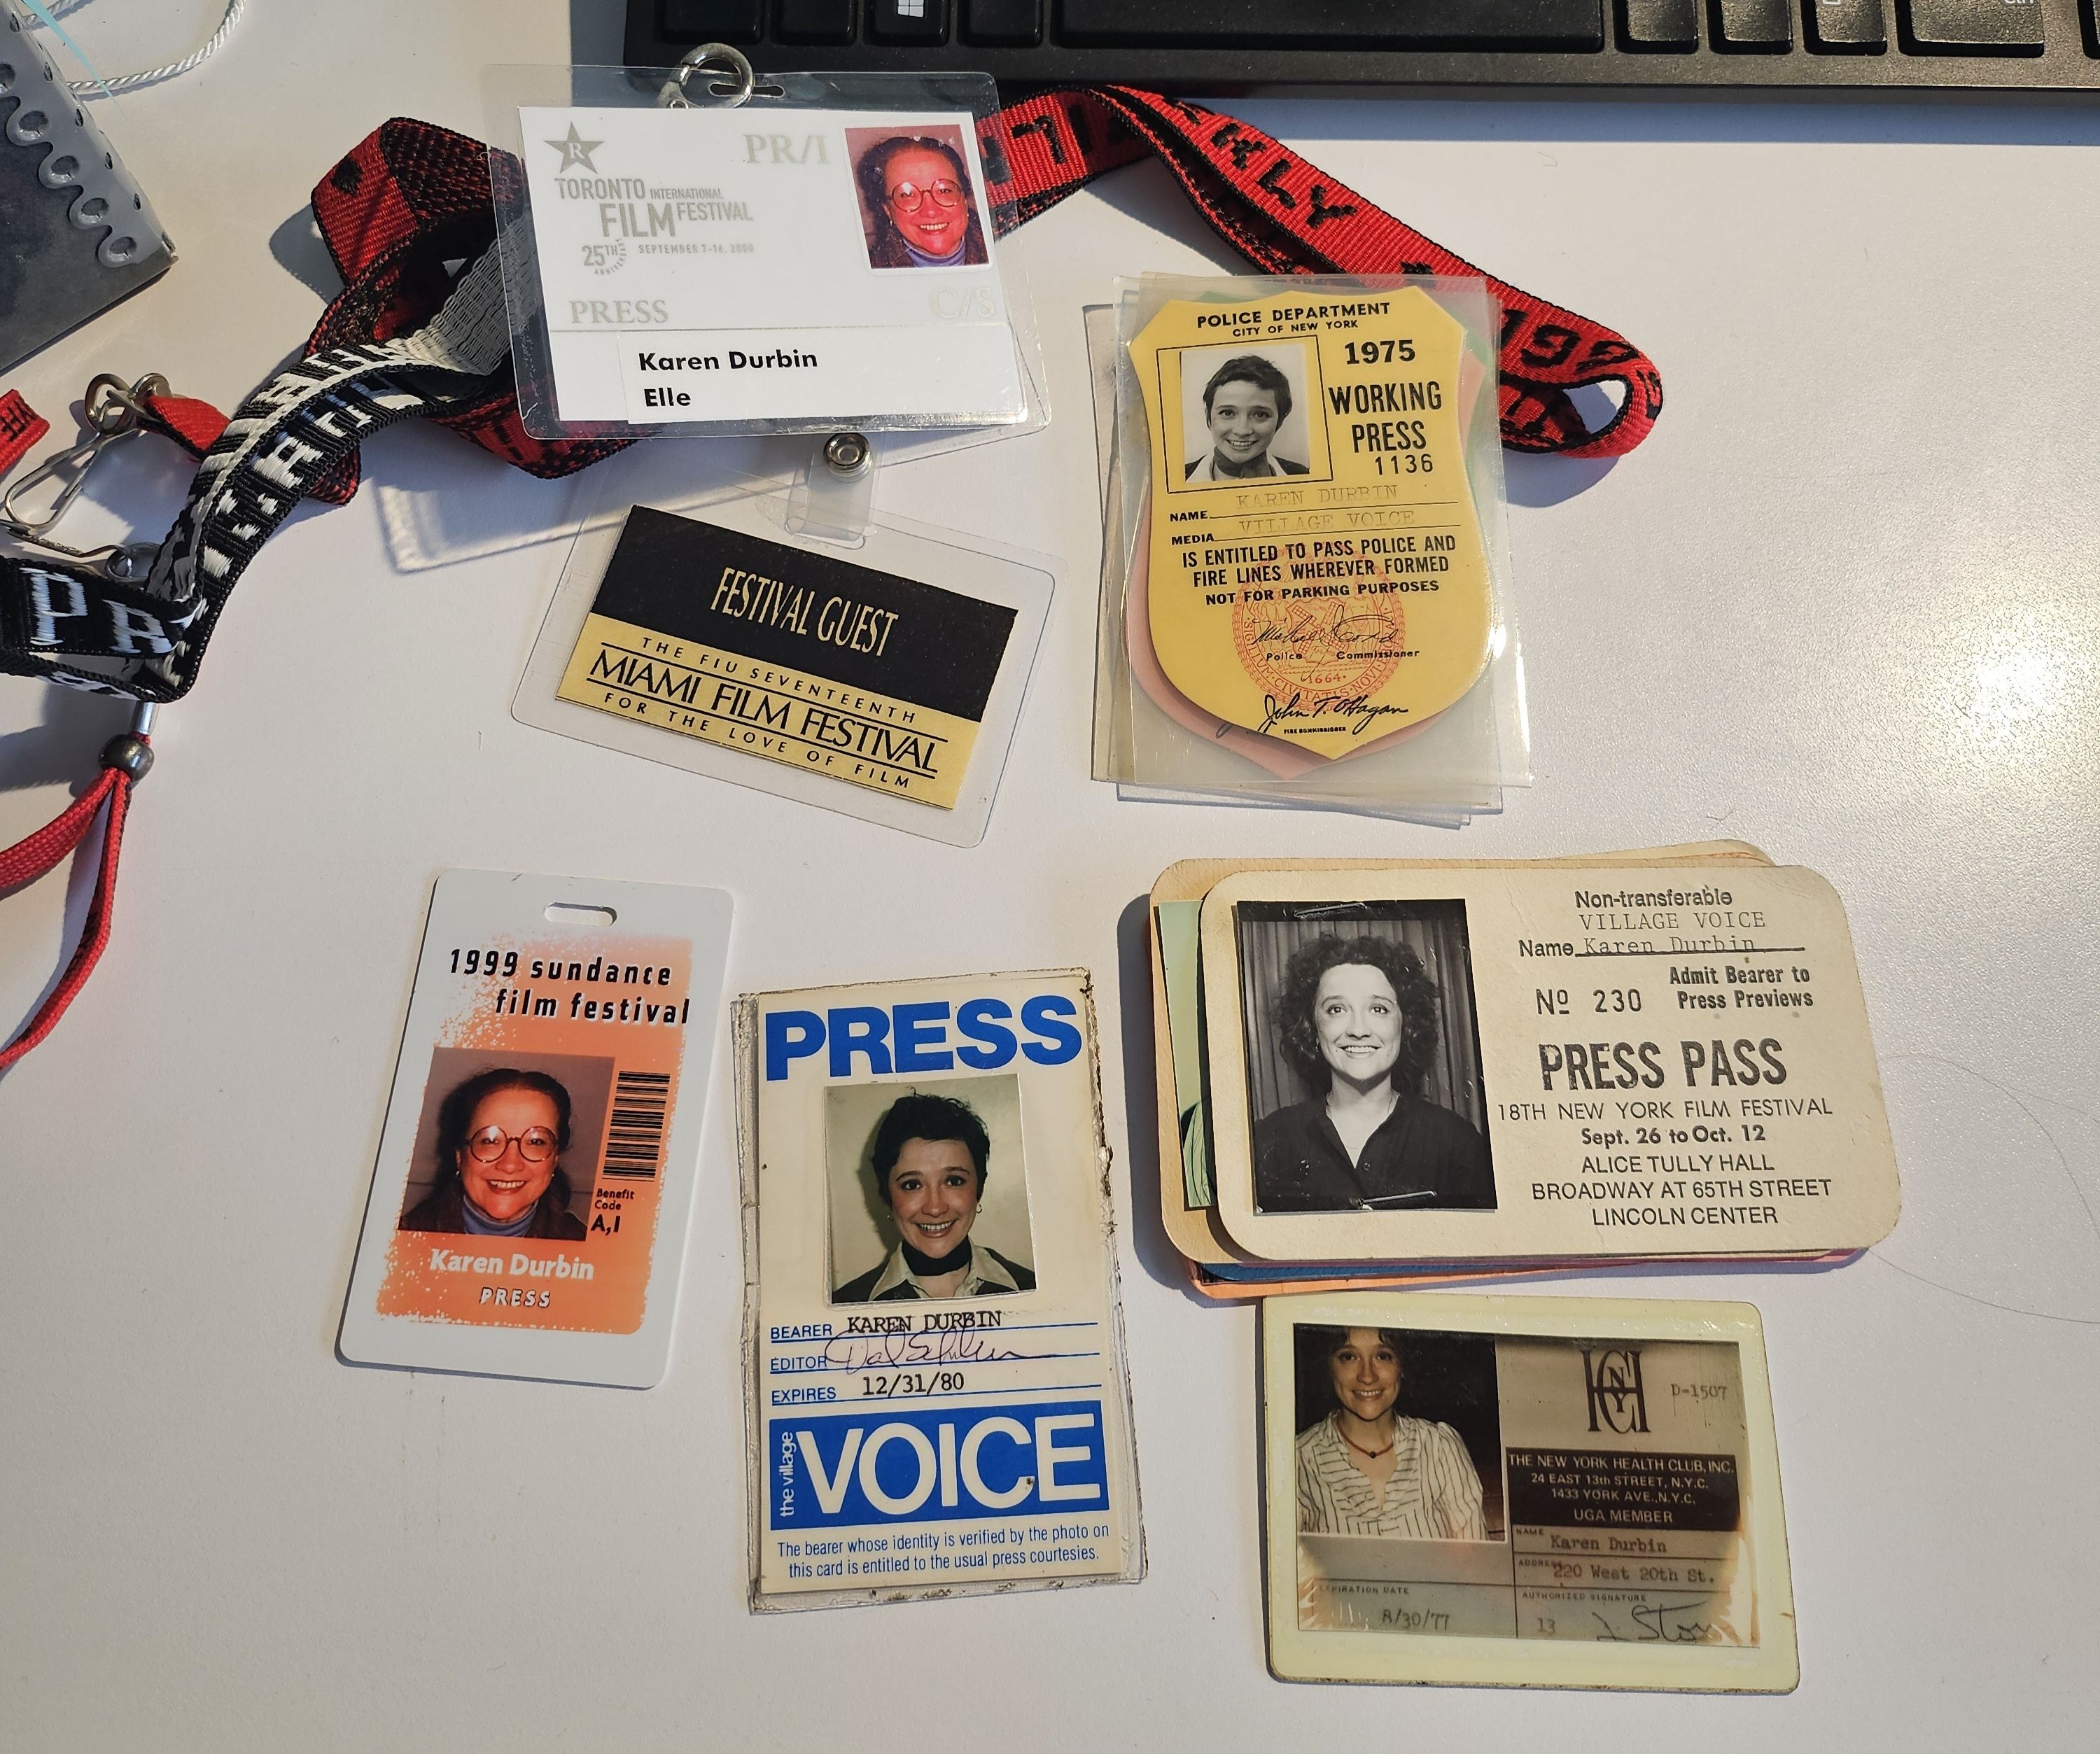 Press passes for Karen Durbin for various publications (the Village Voice, Sundance film festival, and others) displayed on a table